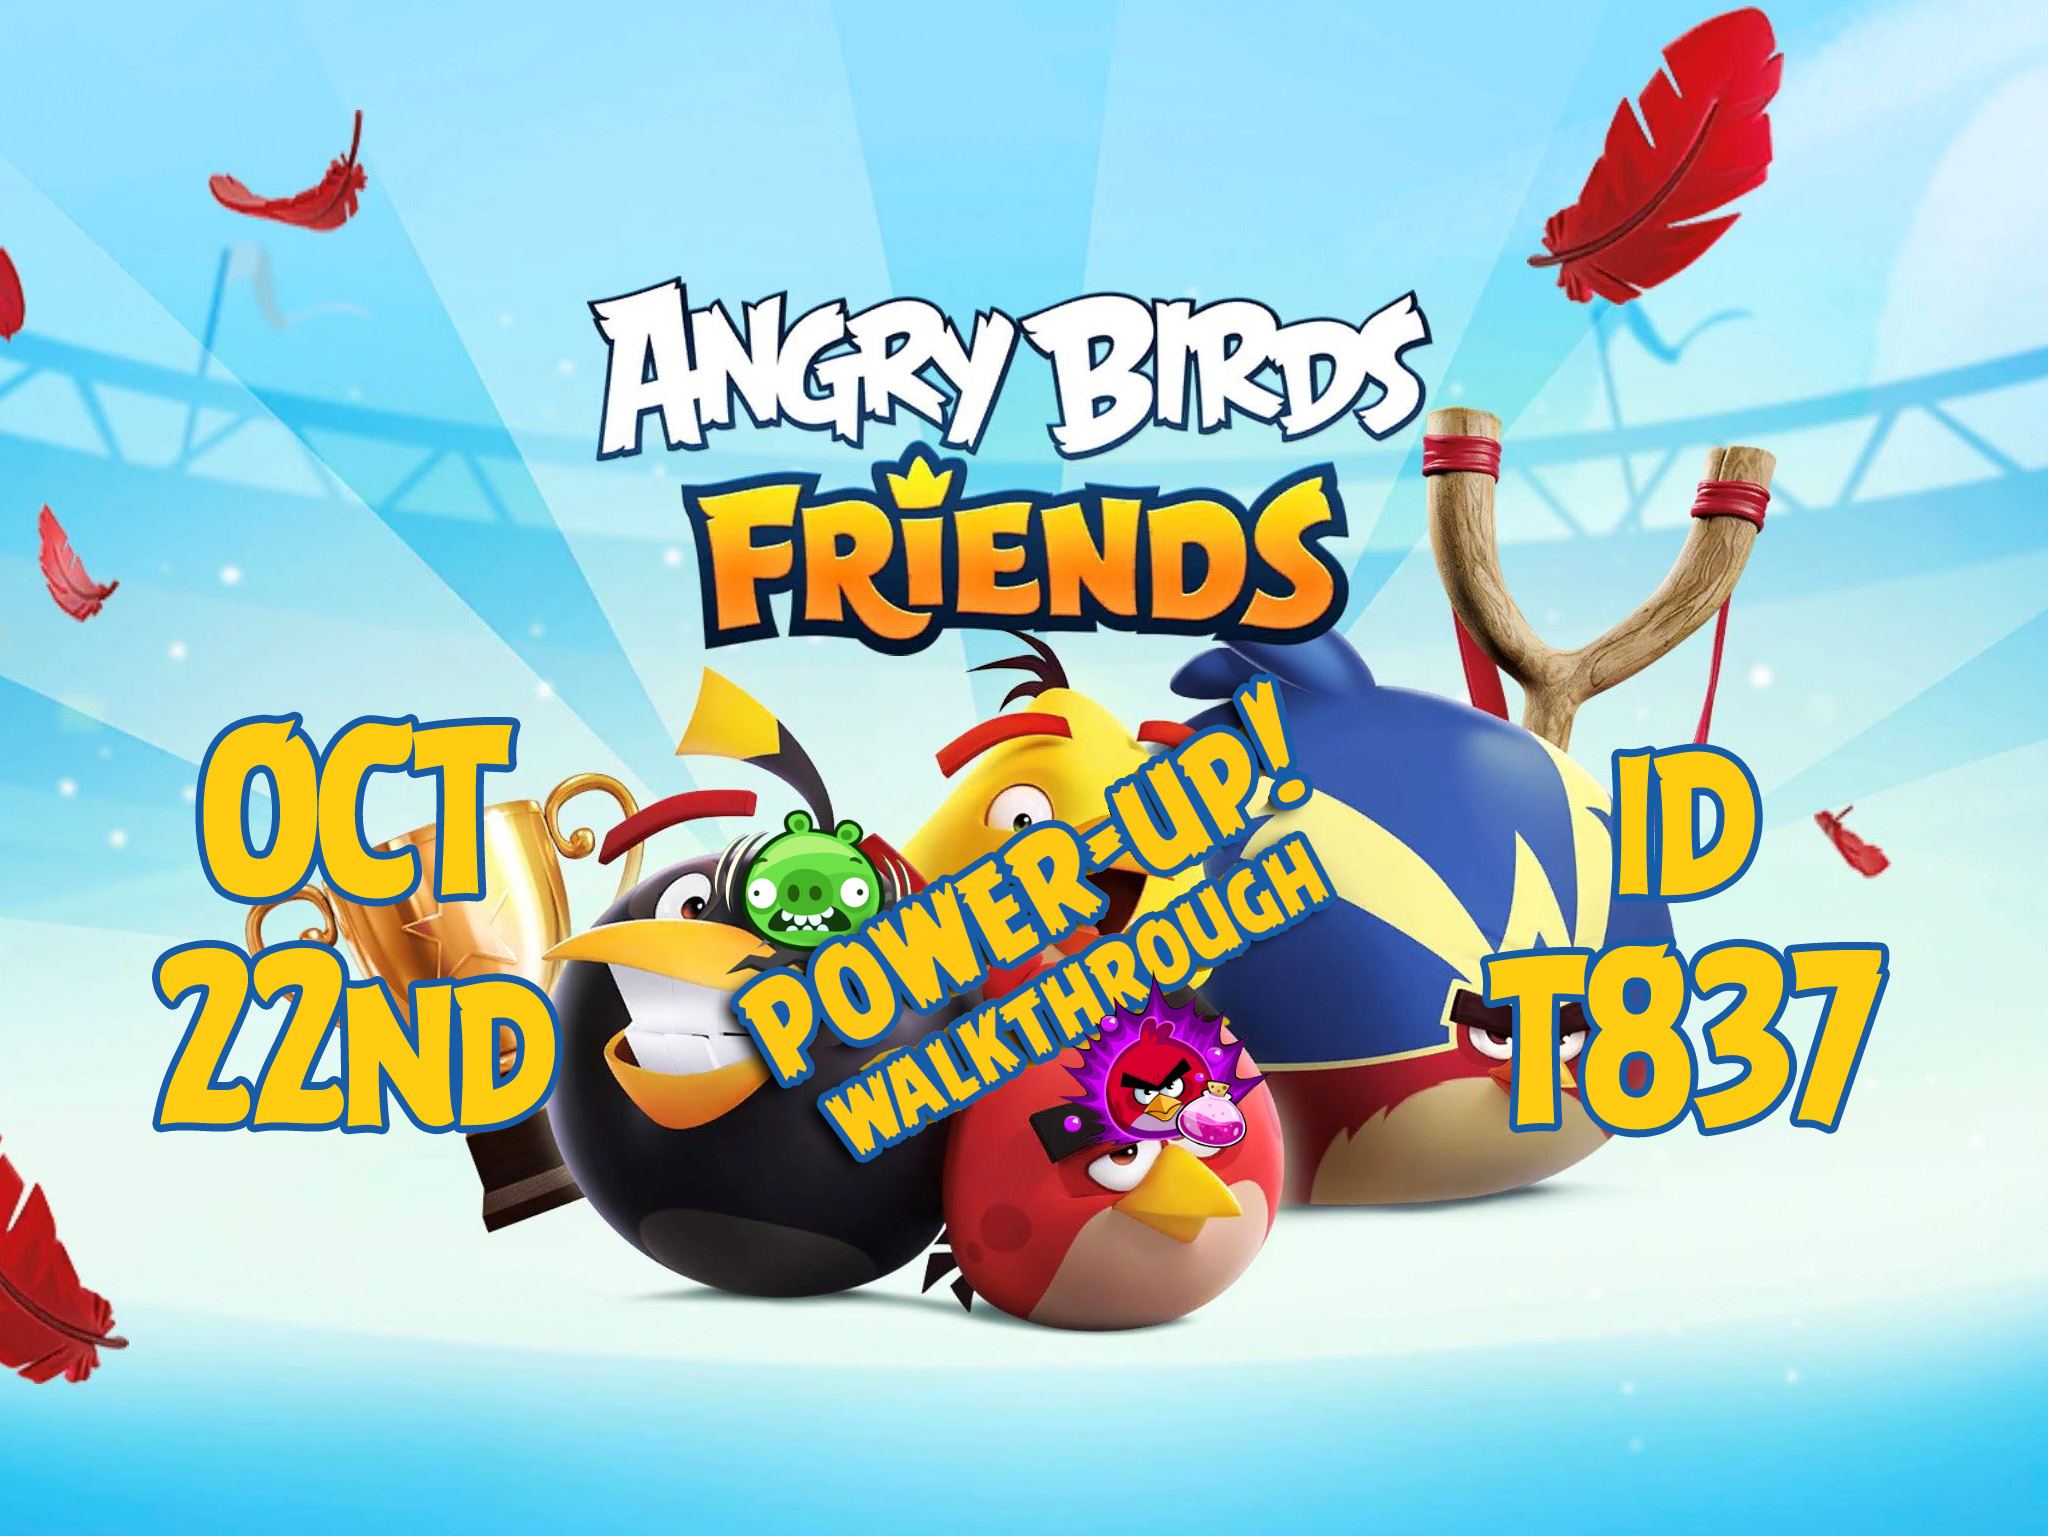 Angry-Birds-Friends-Tournament-T837-Feature-Image-PU